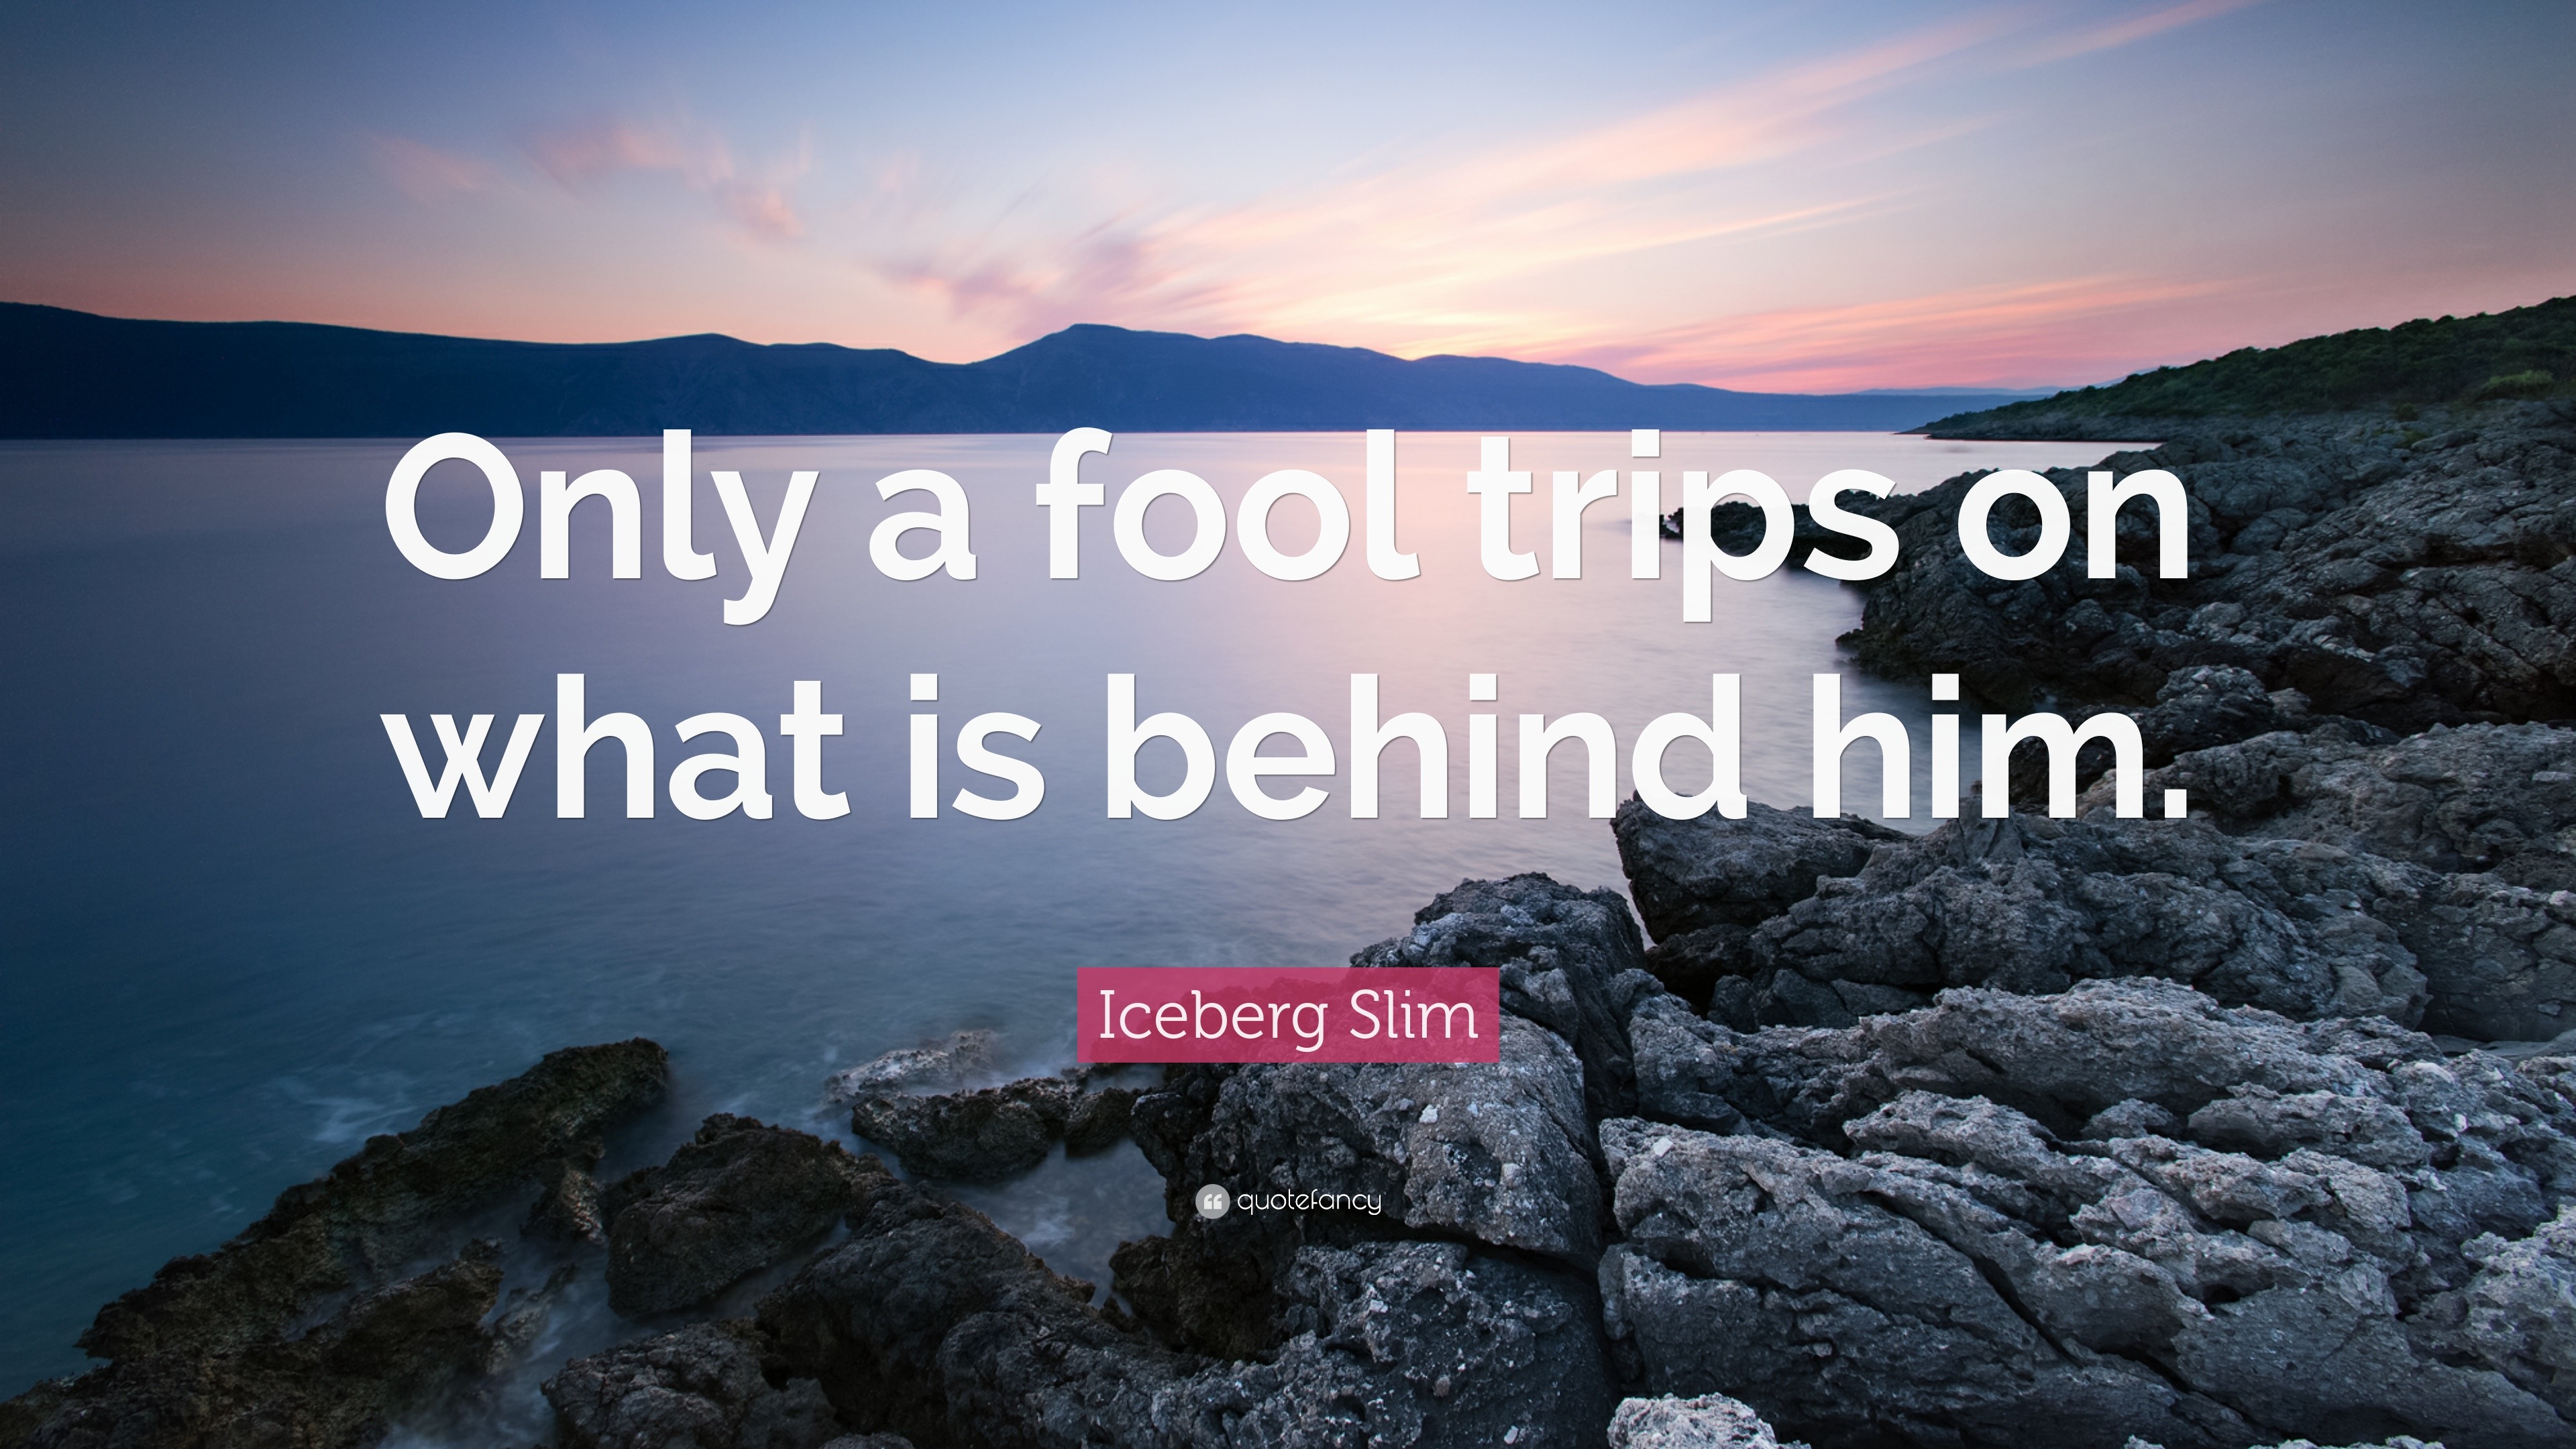 Only a fool trips on what is behind him